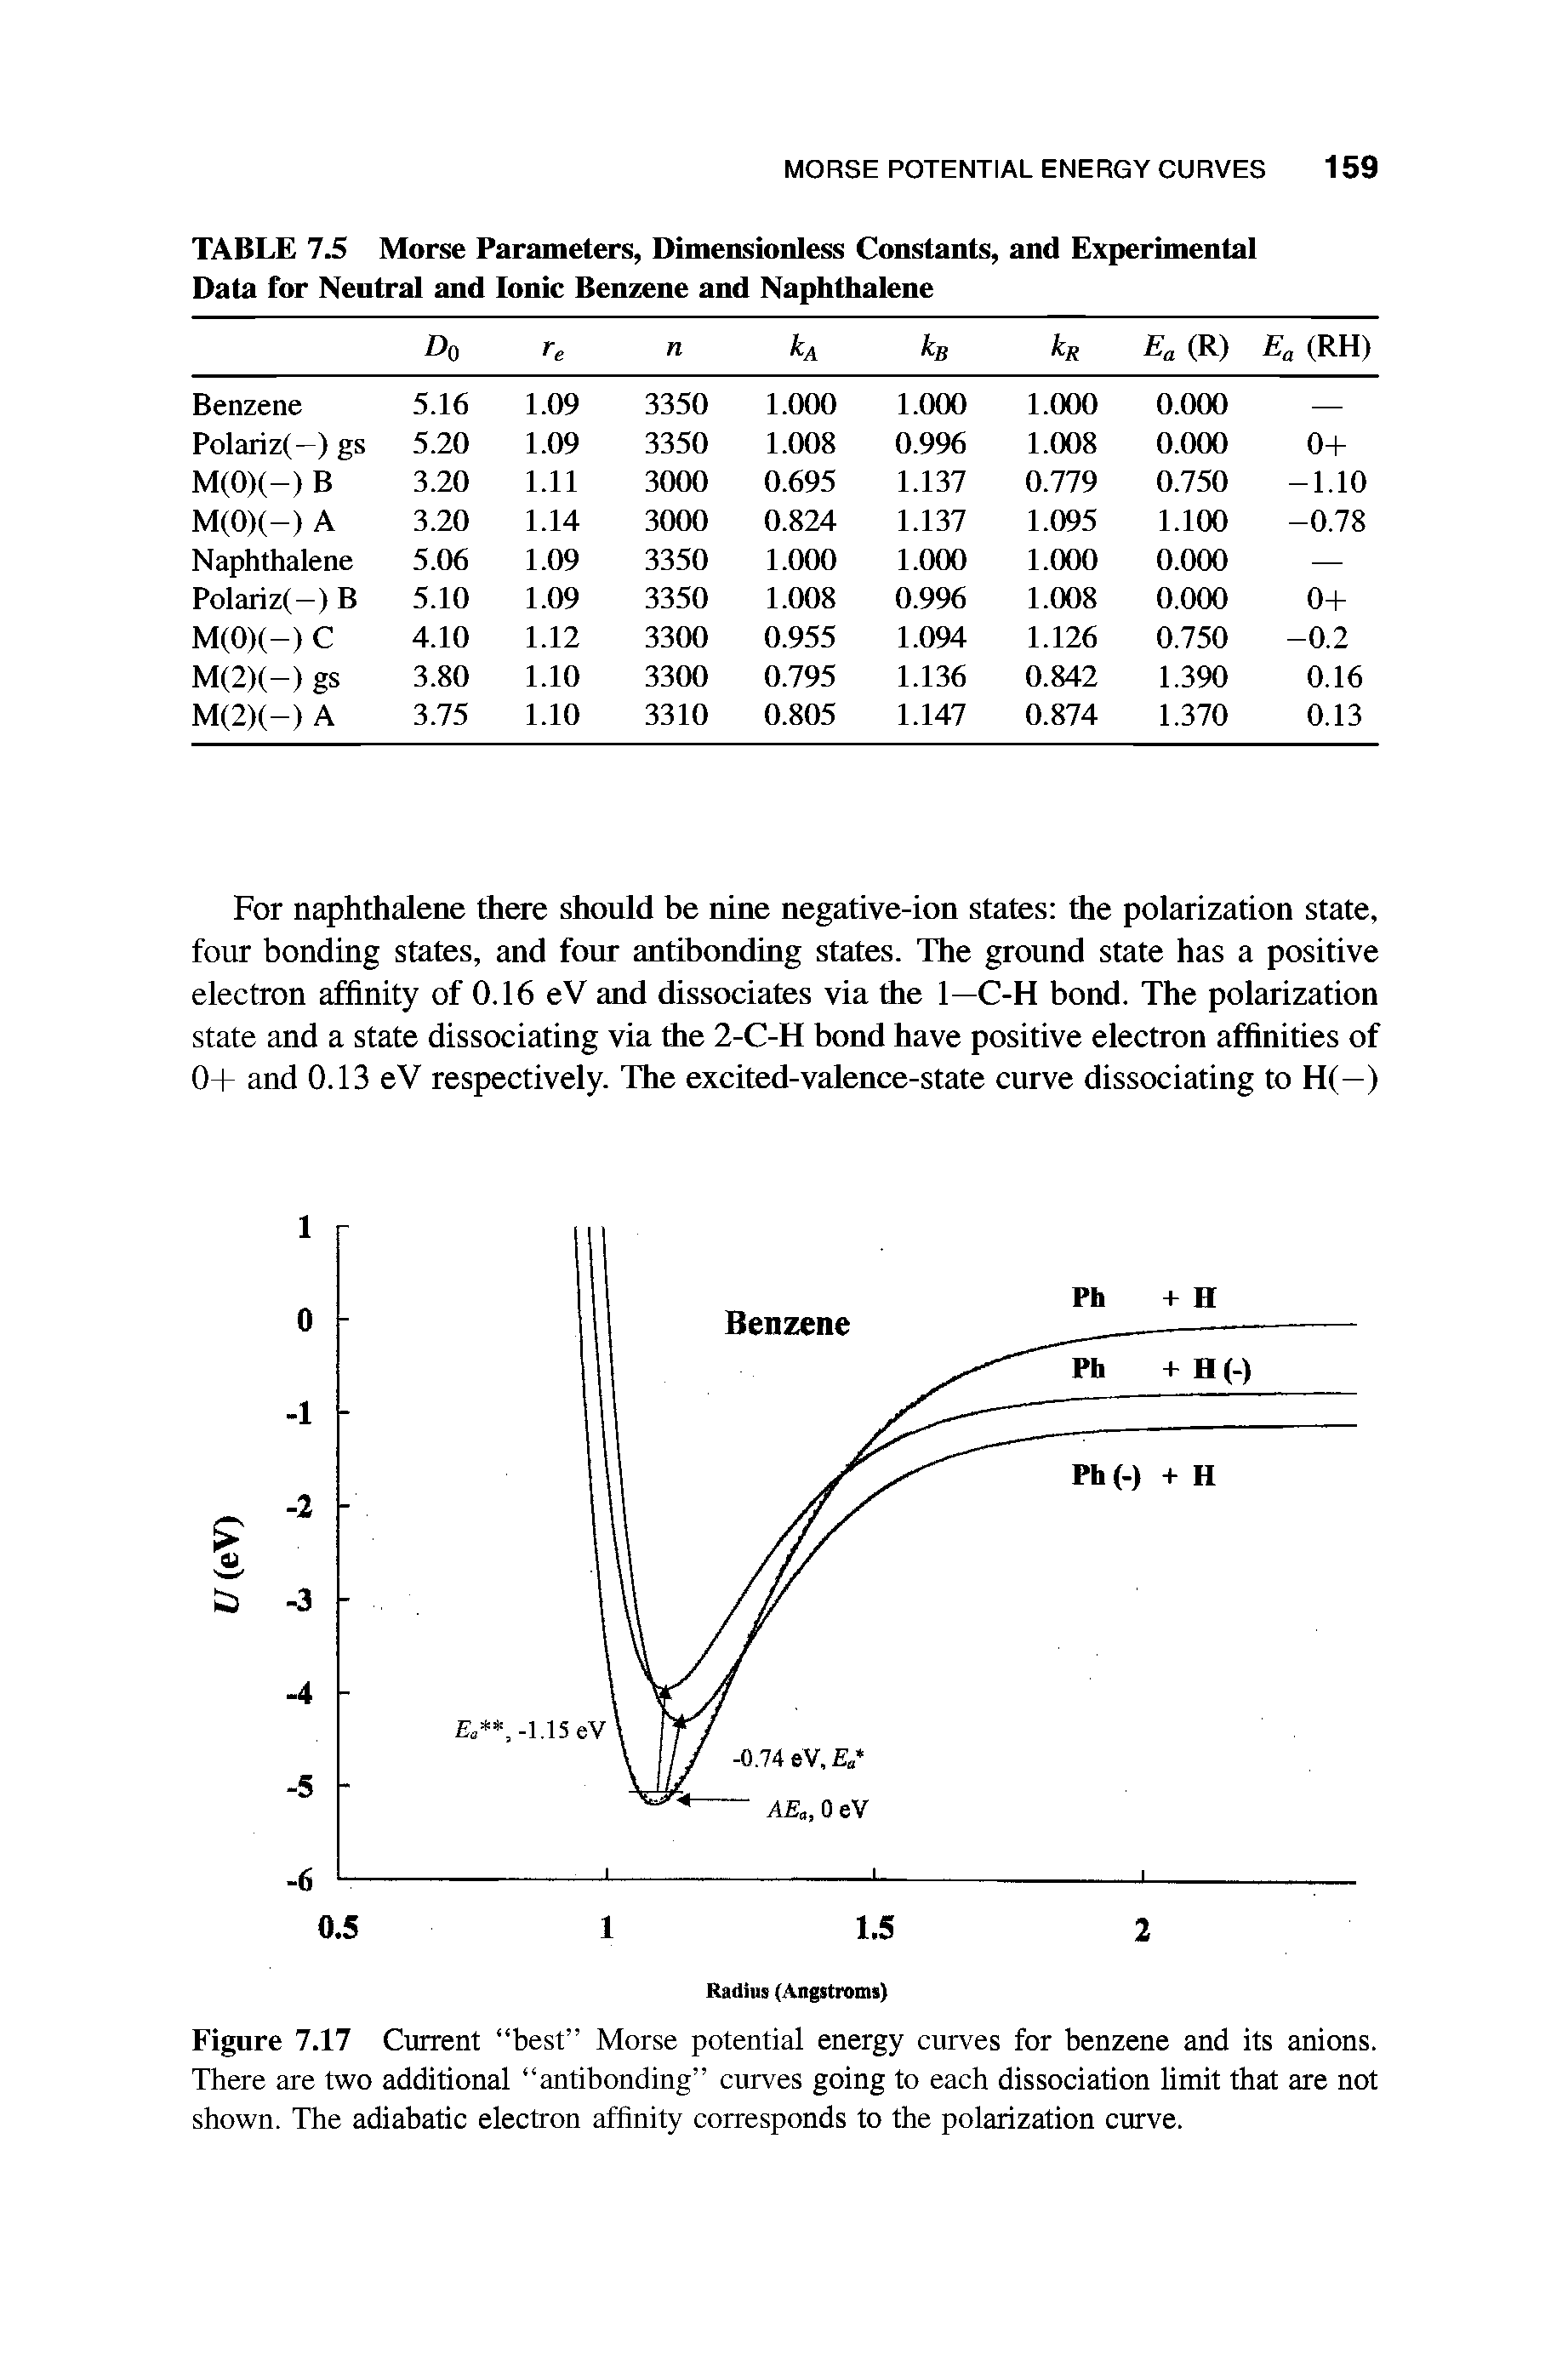 Figure 7.17 Current best Morse potential energy curves for benzene and its anions. There are two additional antibonding curves going to each dissociation limit that are not shown. The adiabatic electron affinity corresponds to the polarization curve.